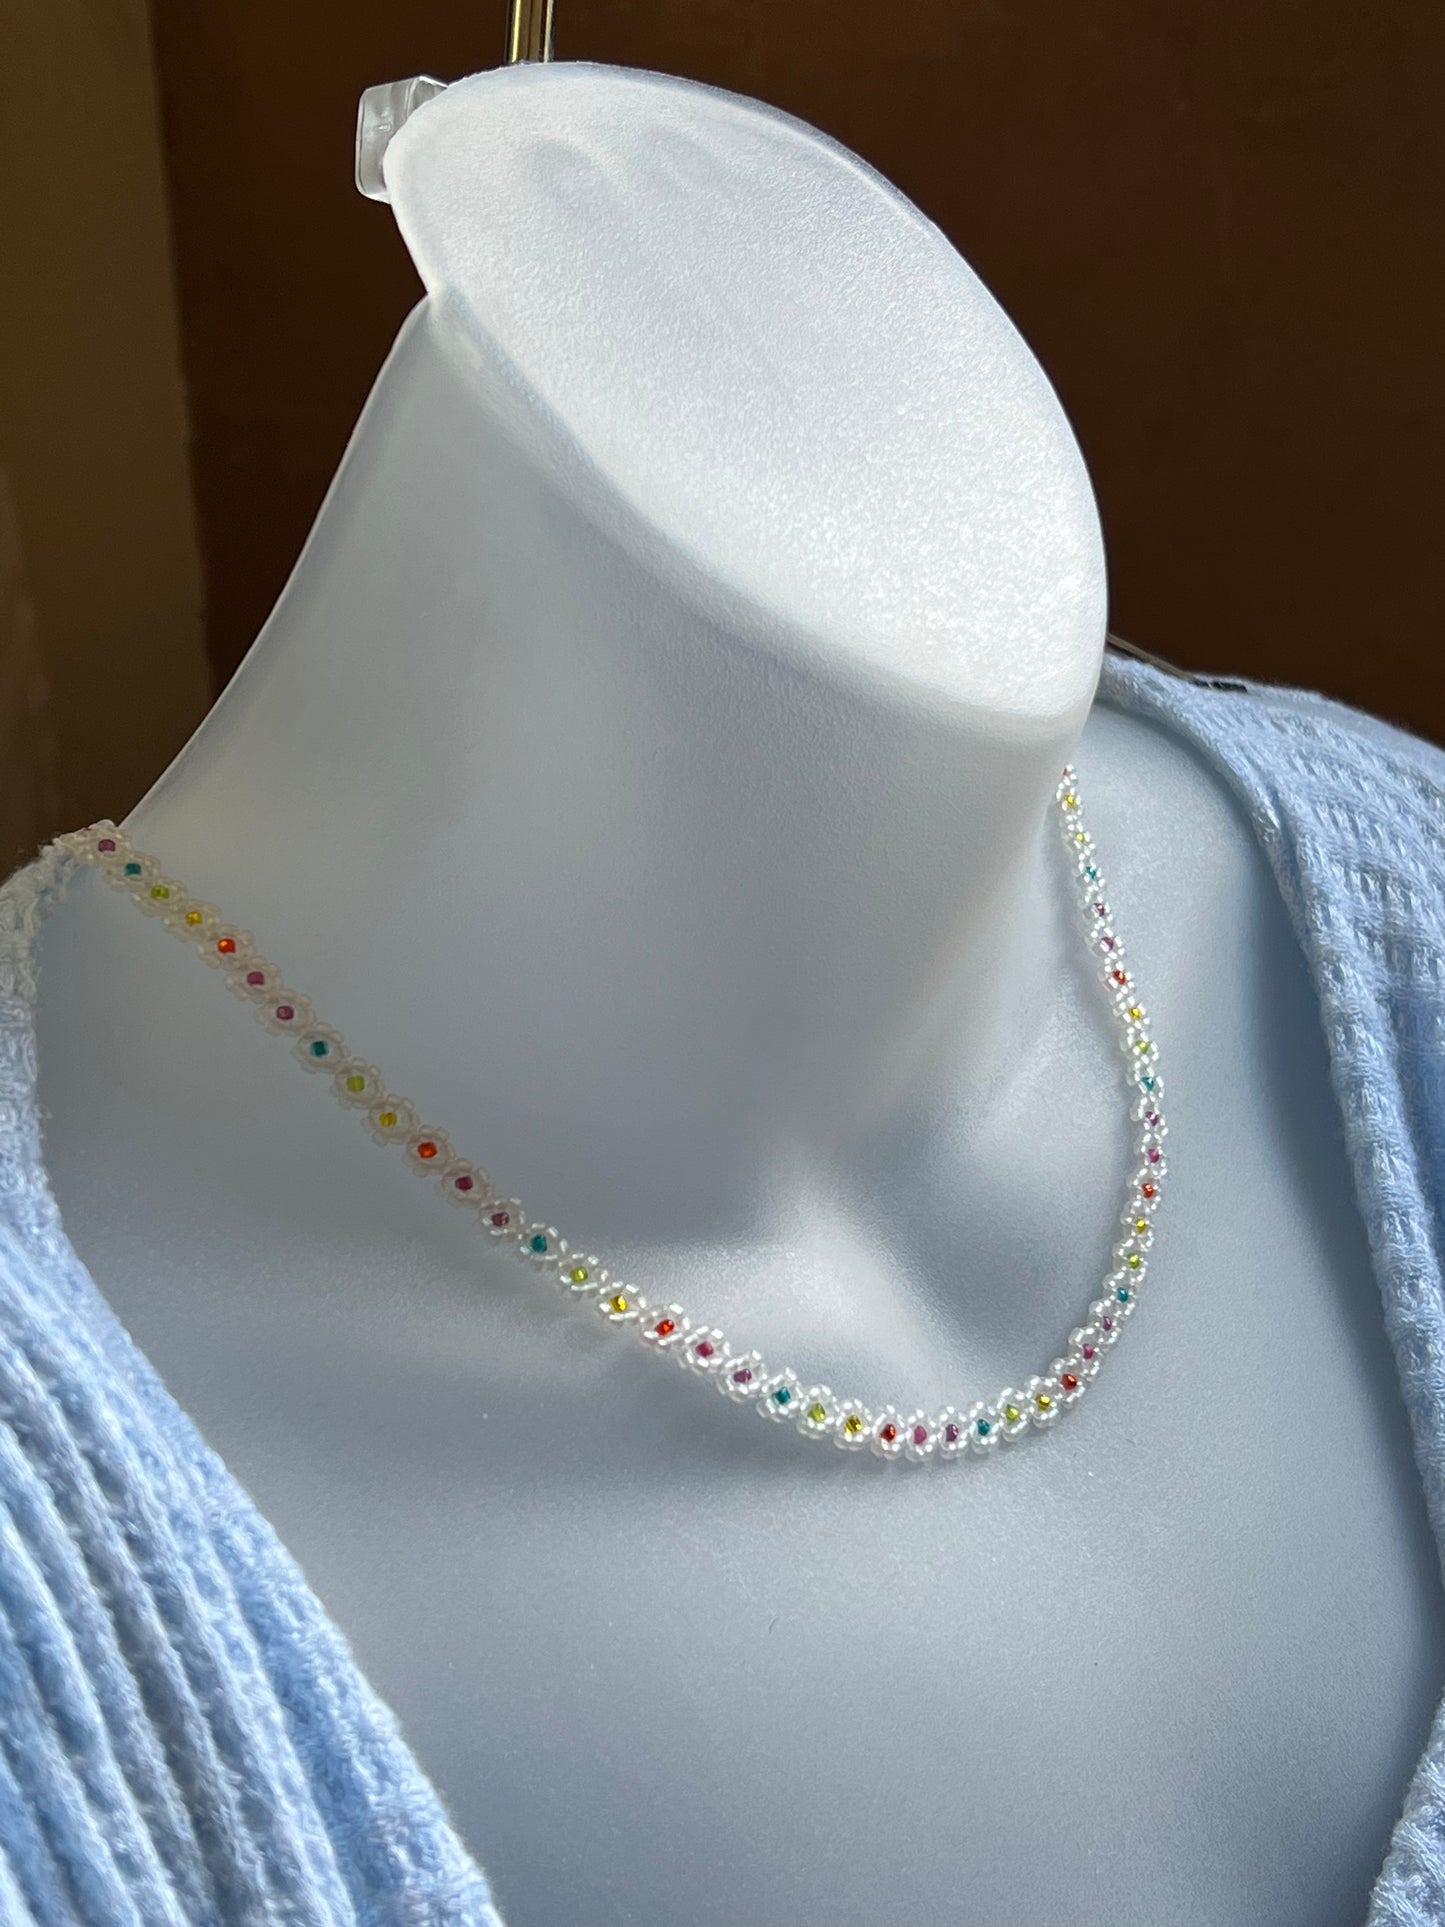 Rainbow filled flower chain necklace